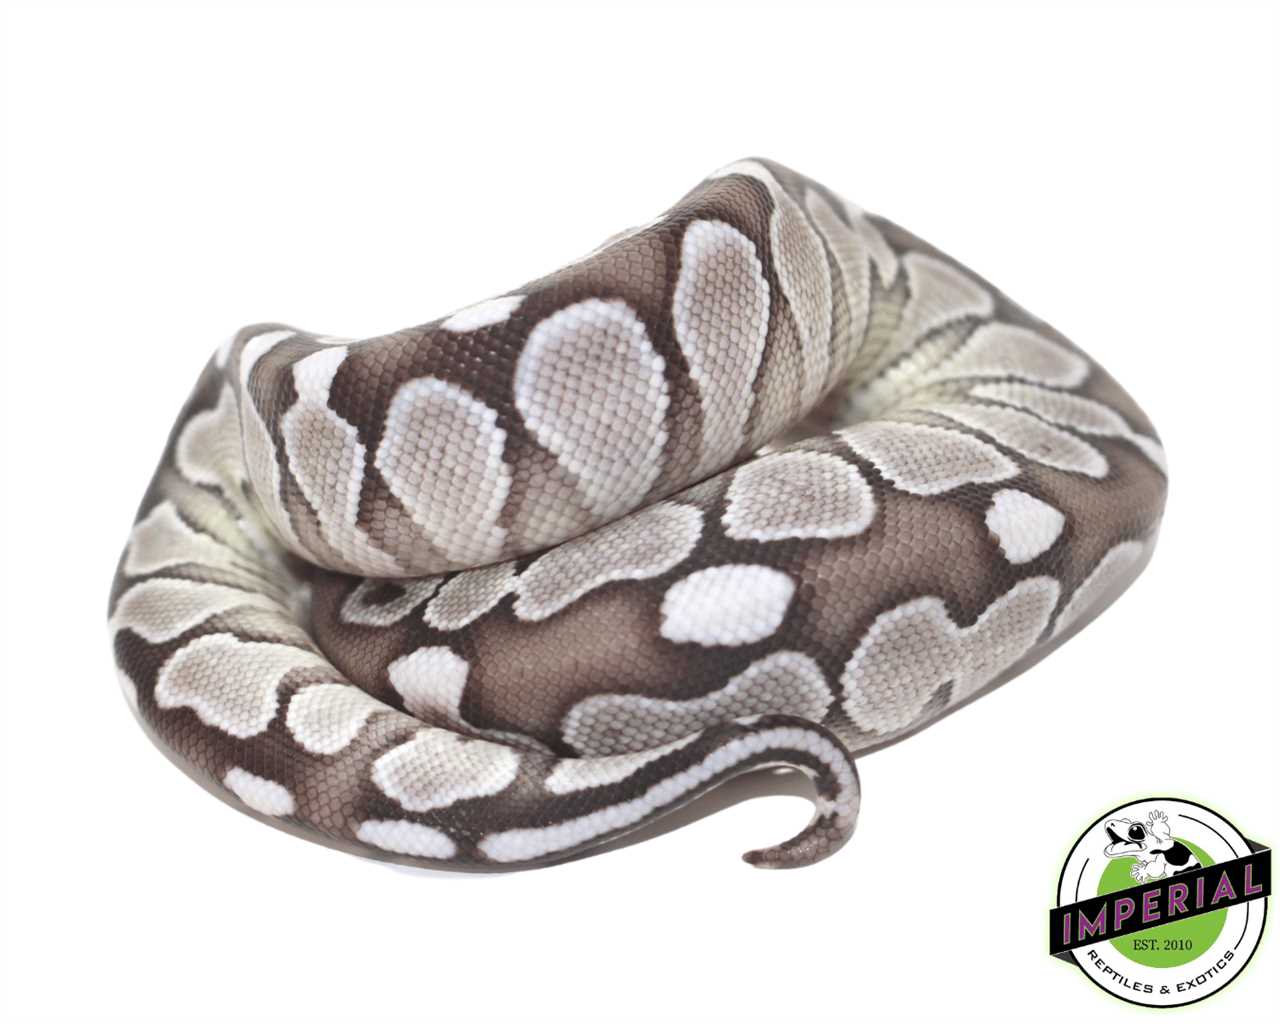 Are axanthic ball pythons good pets for beginners?